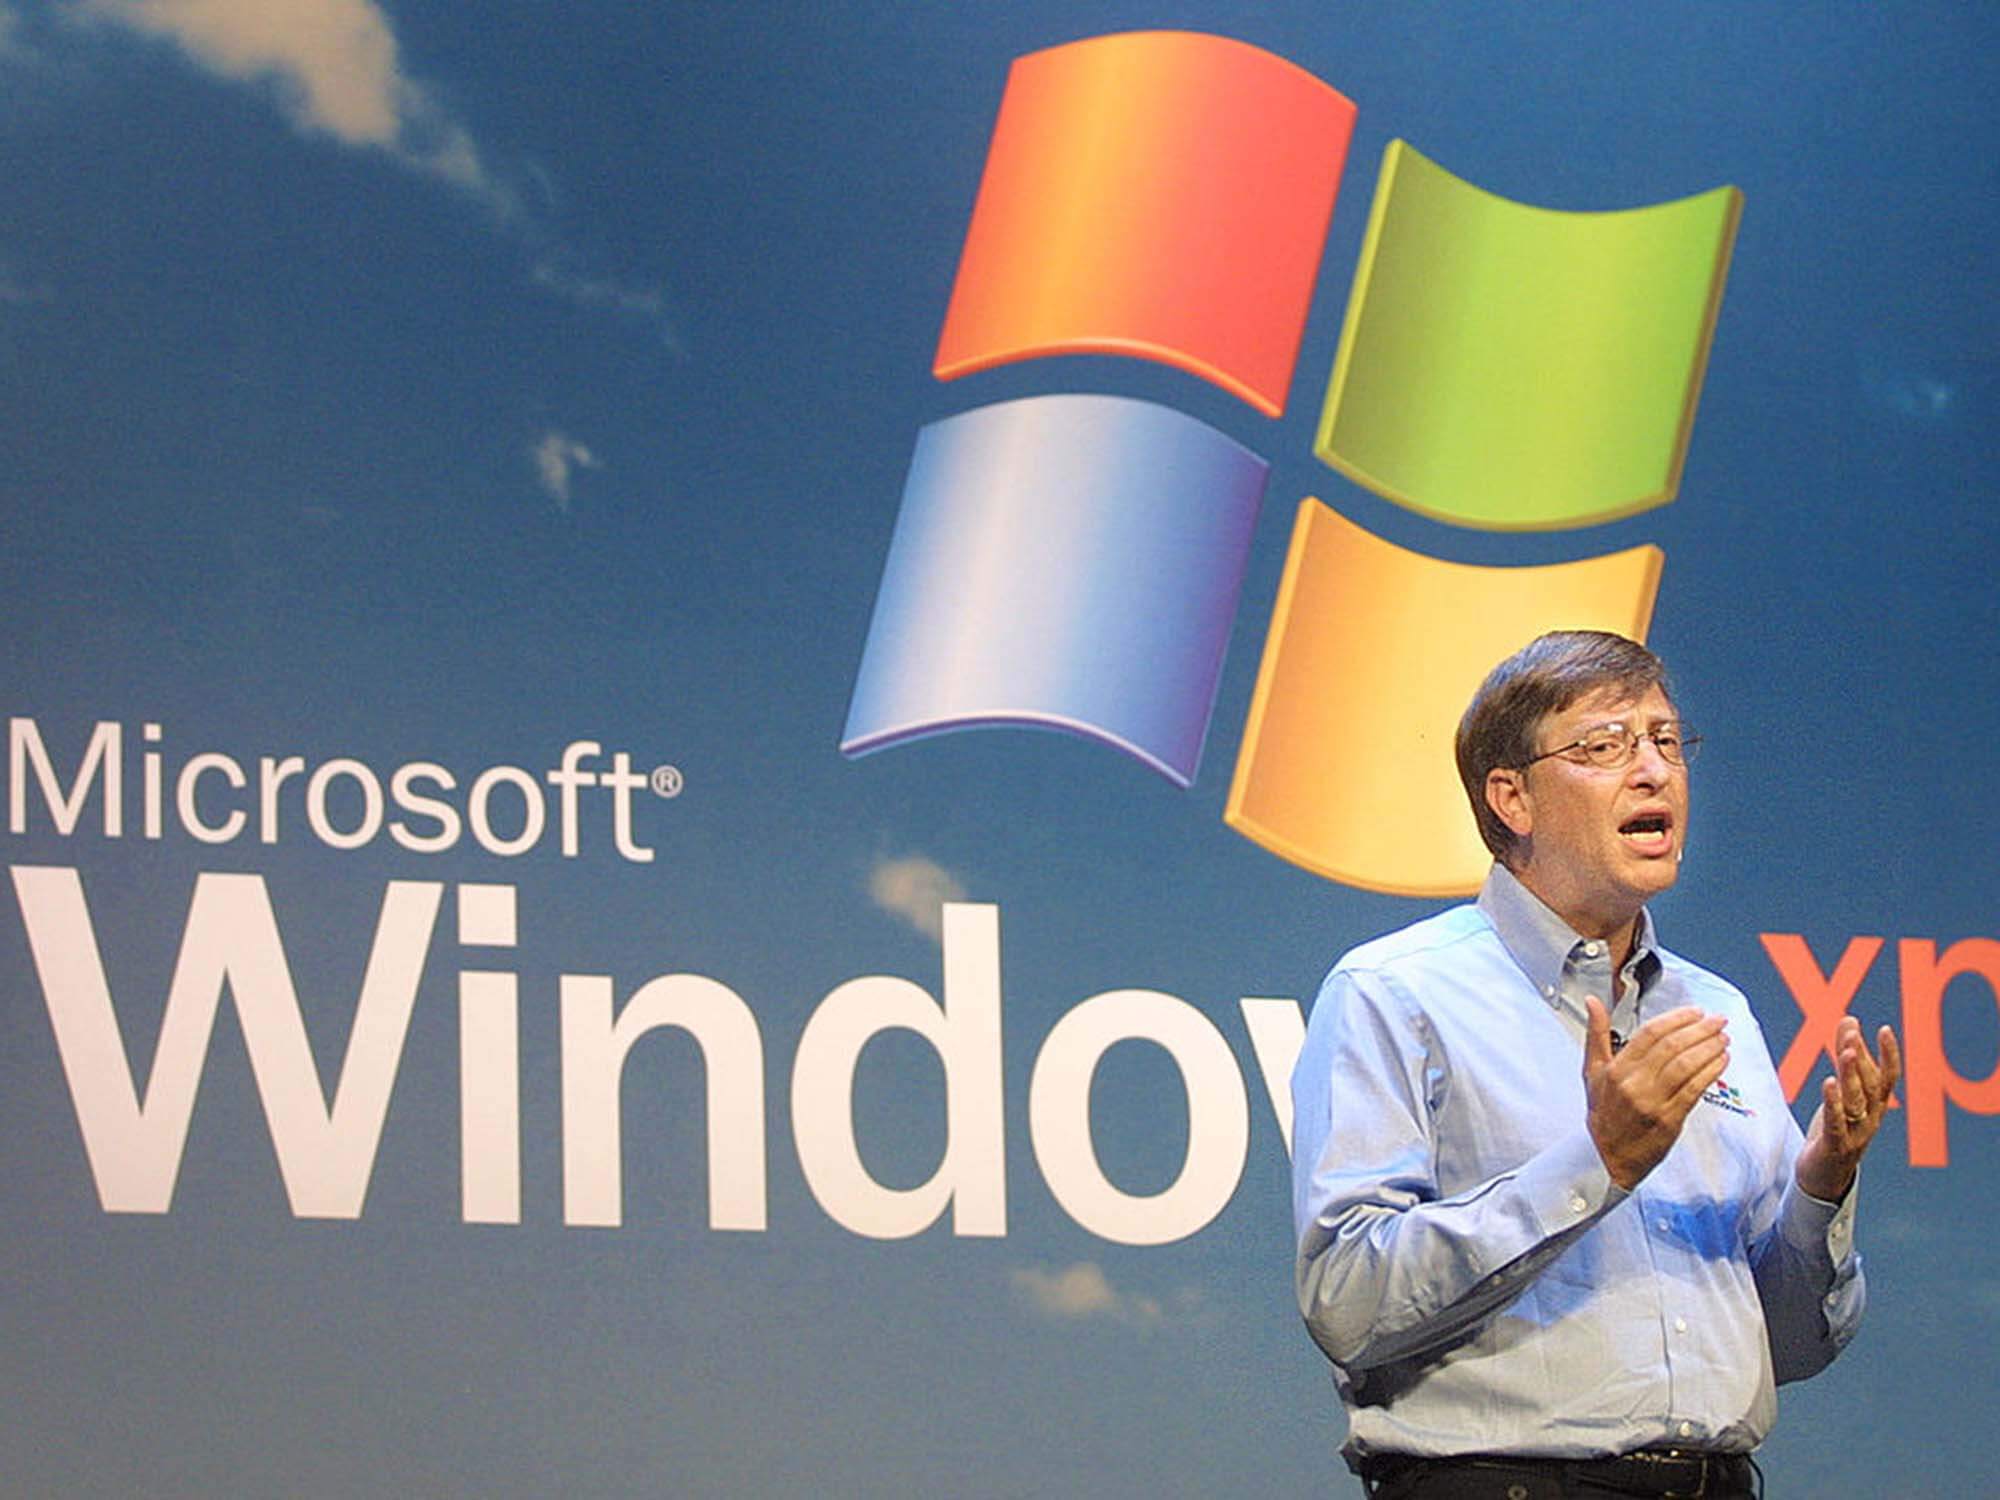 Bill Gates at the Windows XP Product Launch in New York October 2001